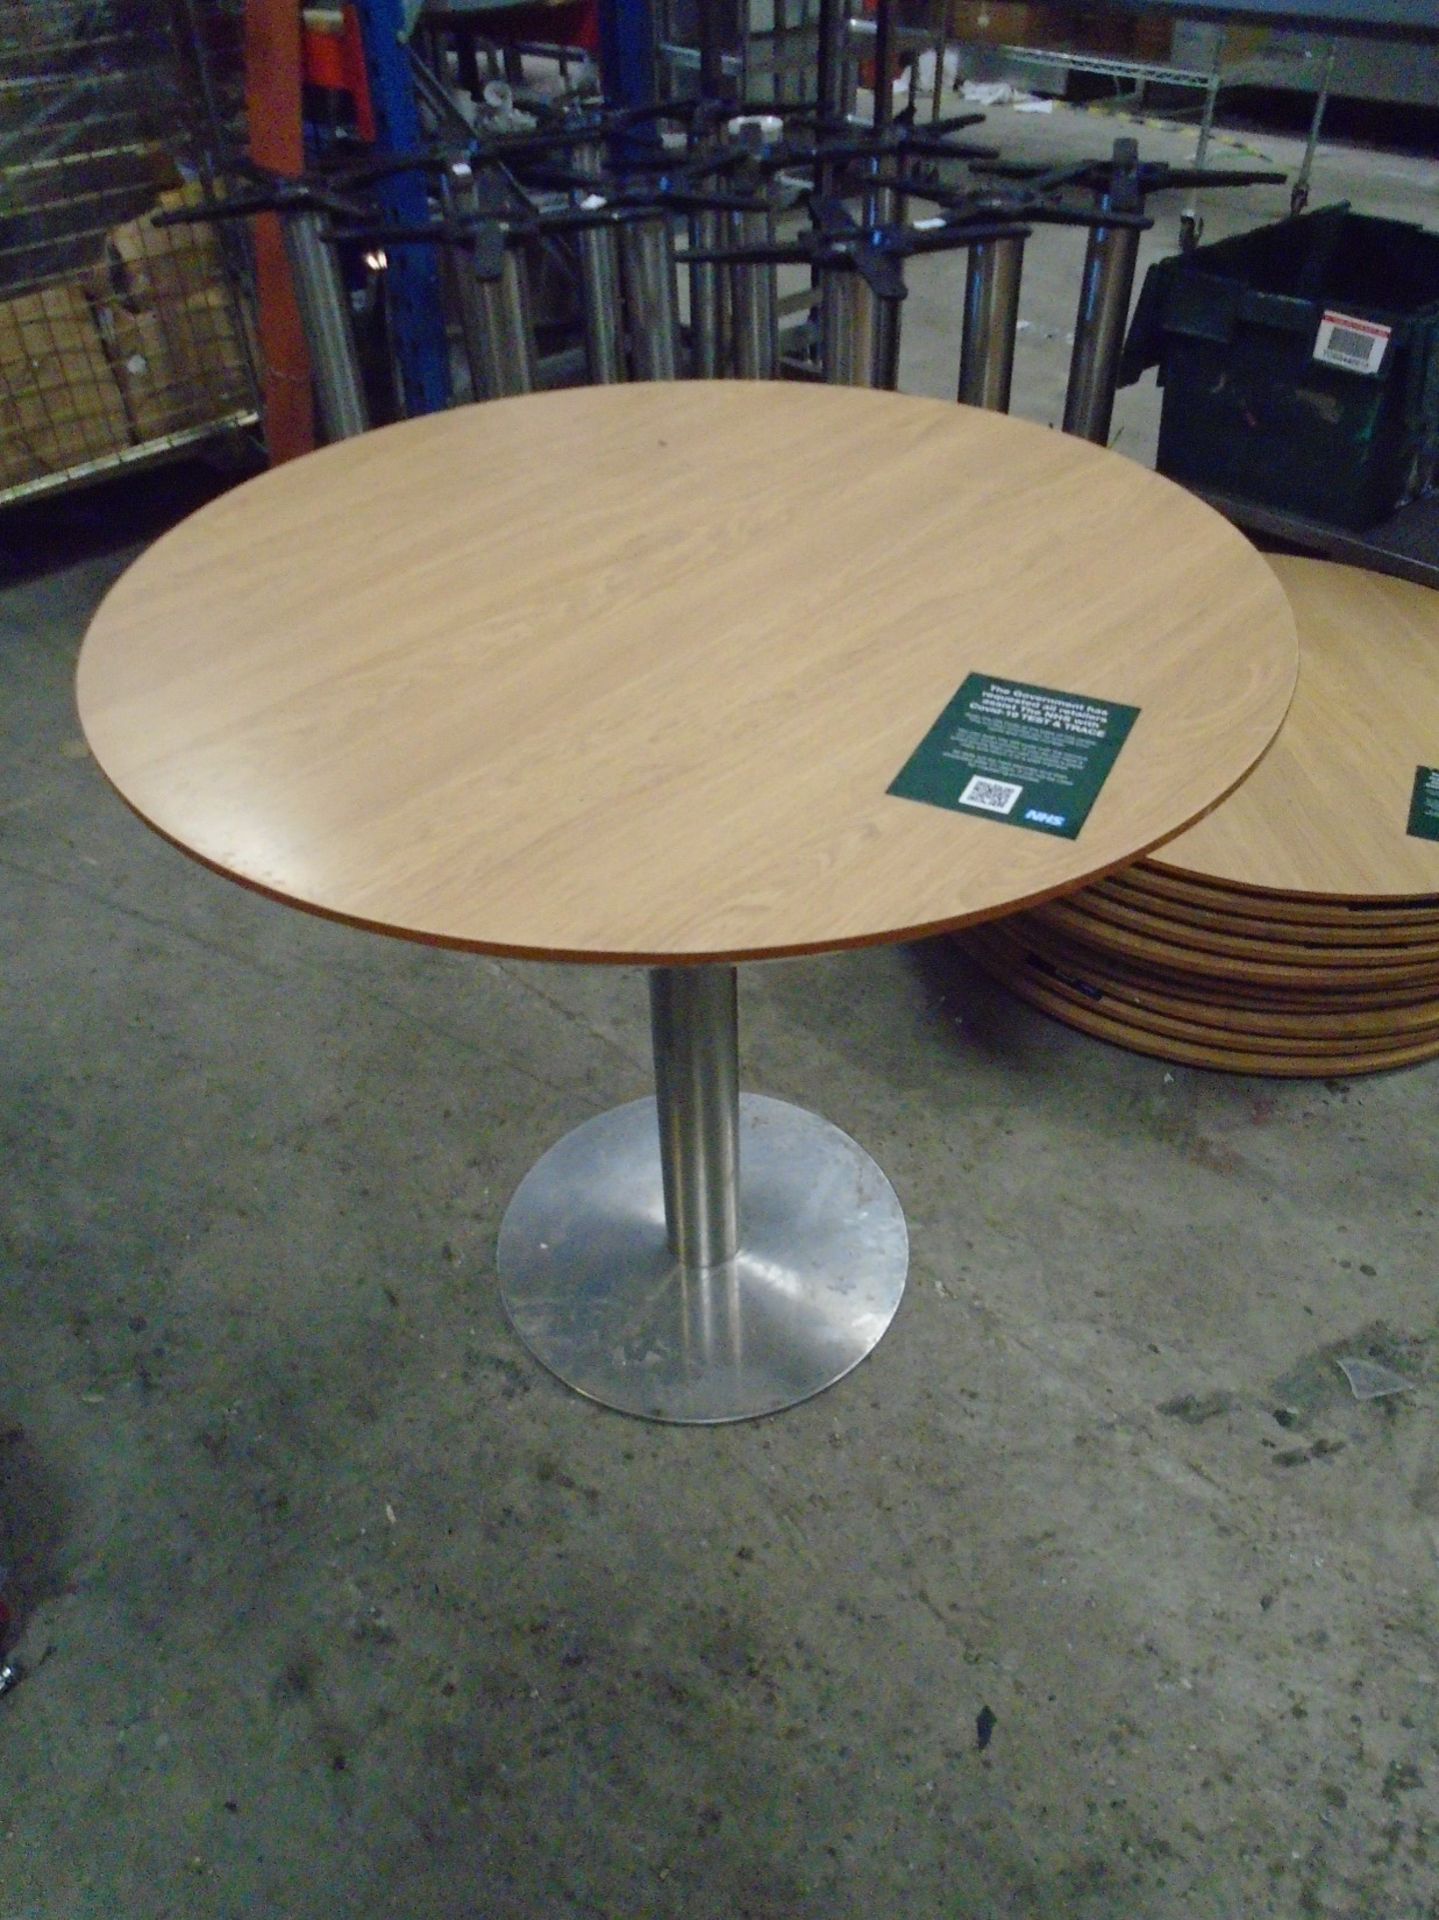 * 4 x S/S pedestal base table with 800 diameter round tops - beech effect